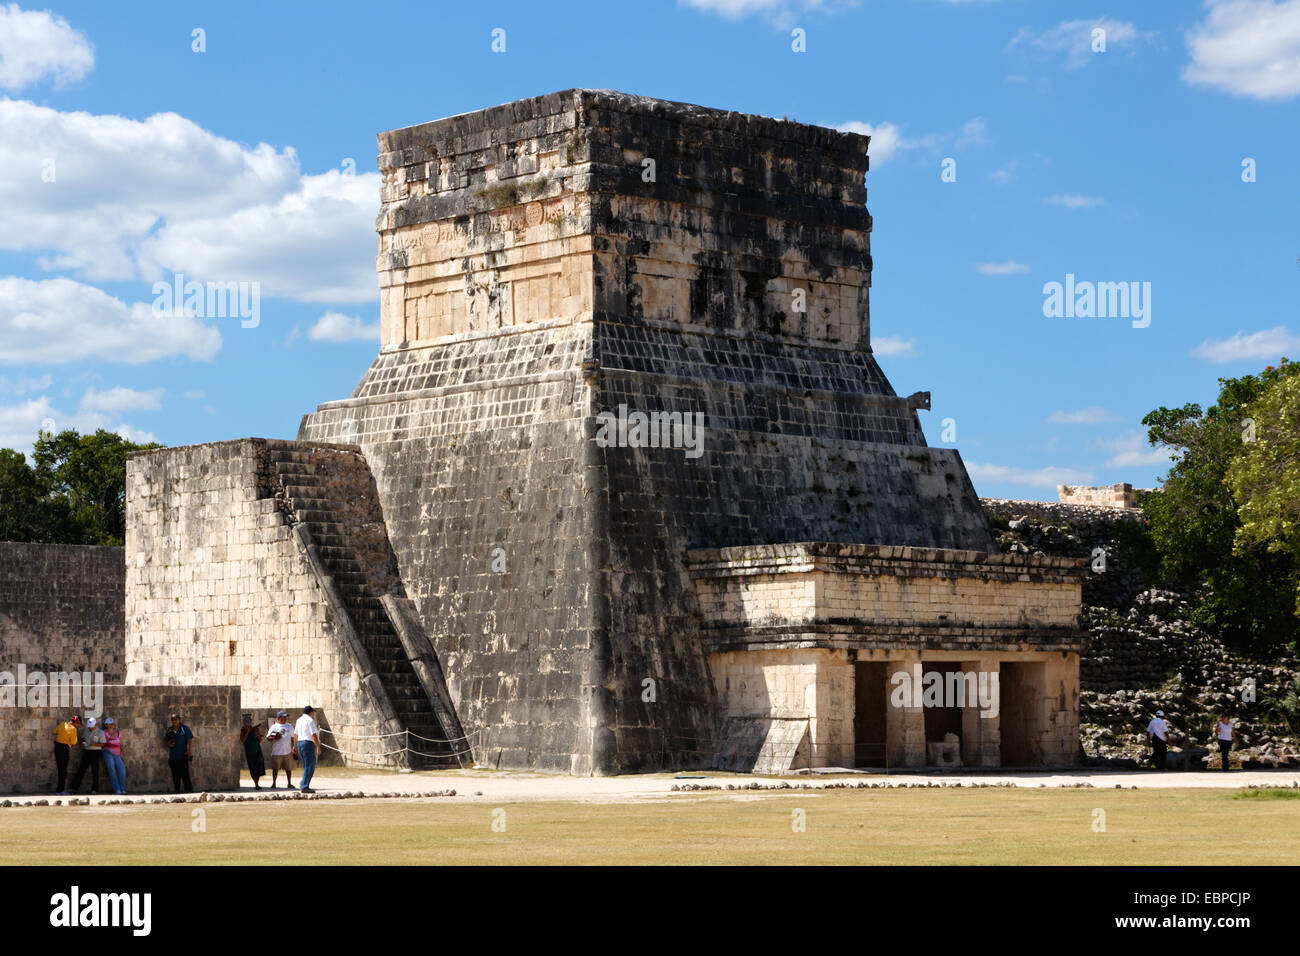 Small tower forming part of the Juego de Pelota (ball game) sports field among the Mayan ruins of Chichen Itza, Yucatan, Mexico. Stock Photo